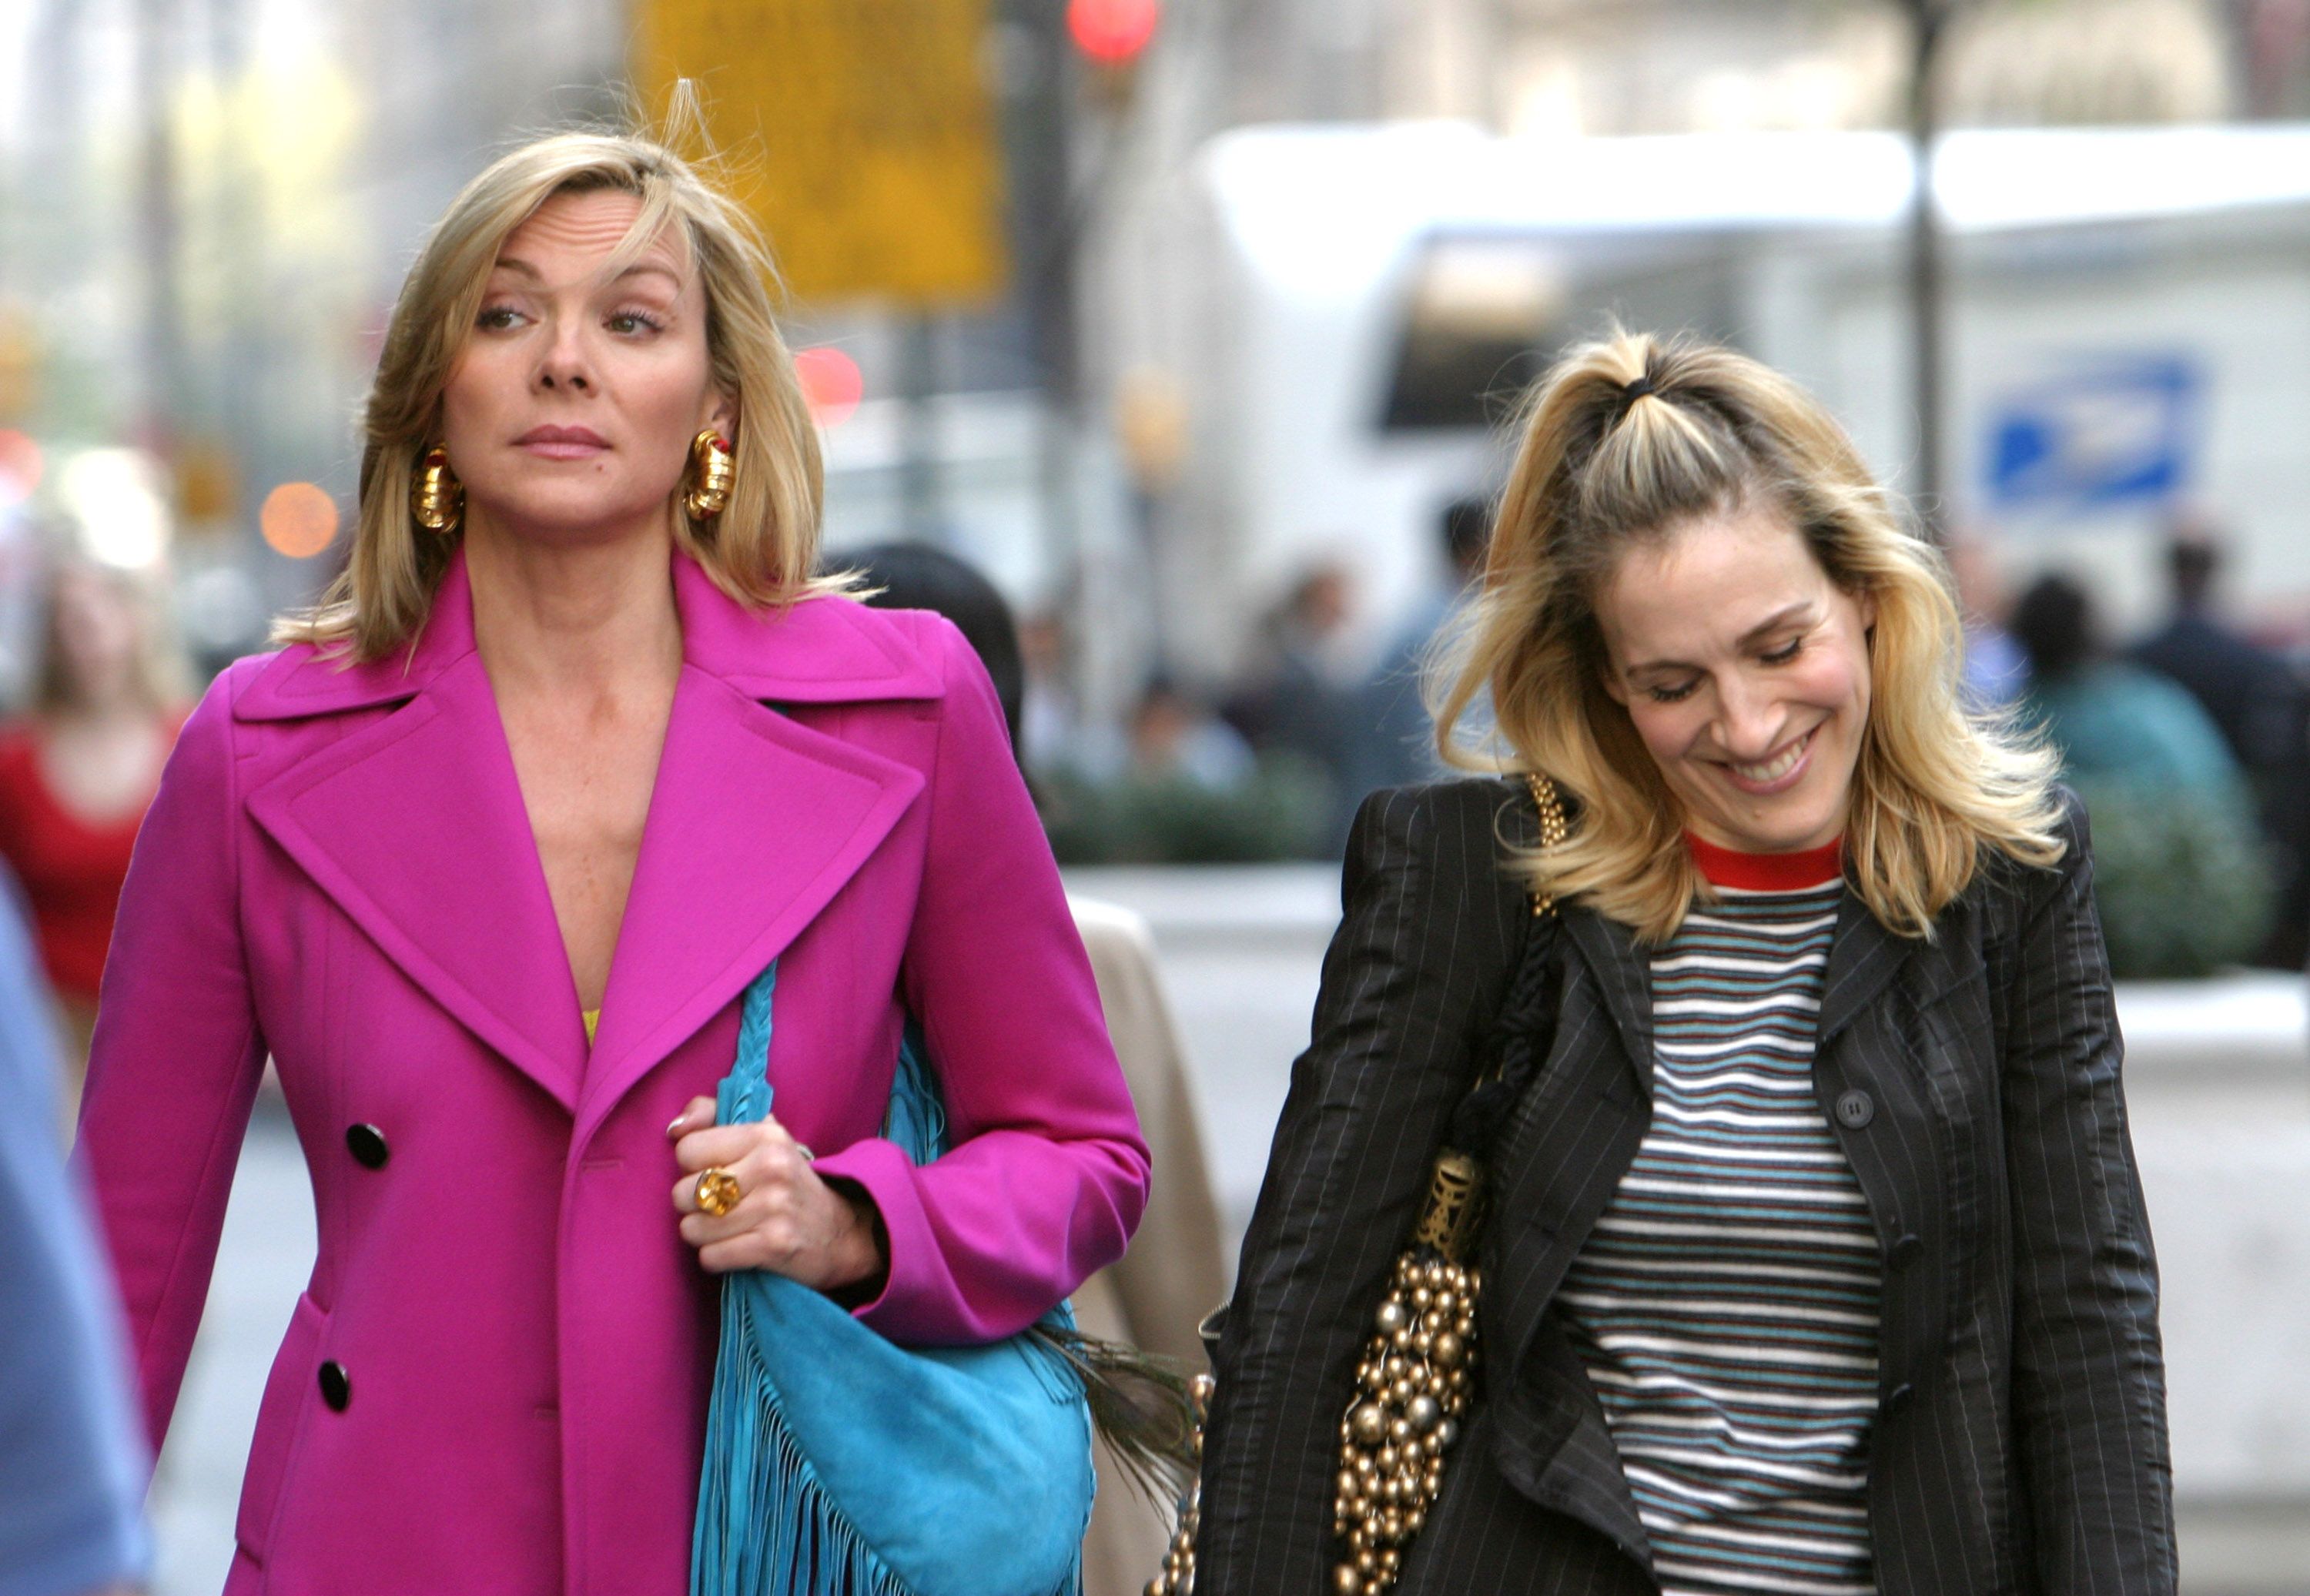 Kim Cattrall and Sarah Jessica on location for "Sex And The City" at Saks Fifth Avenue in New York | Source: Getty Images